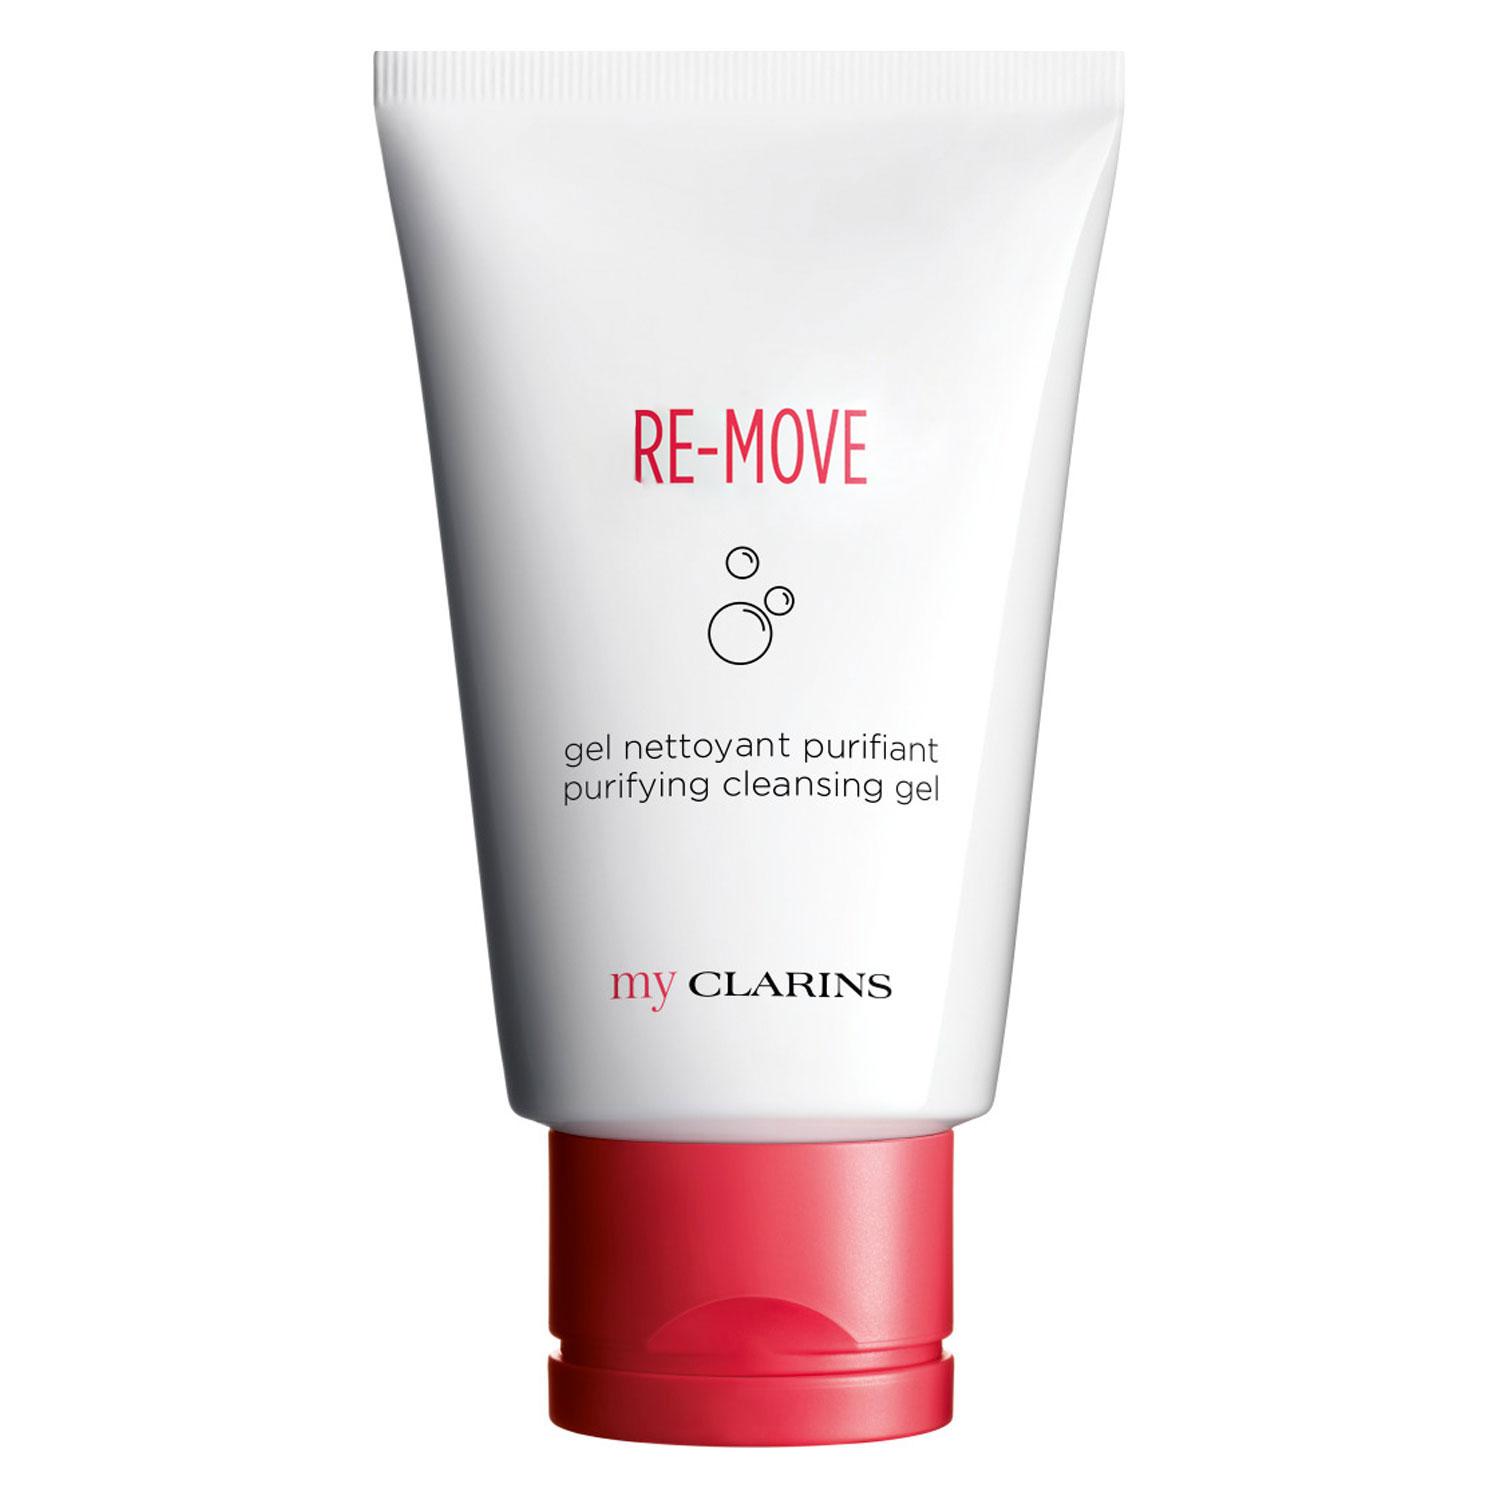 myCLARINS - RE-MOVE Purifying Cleansing Gel